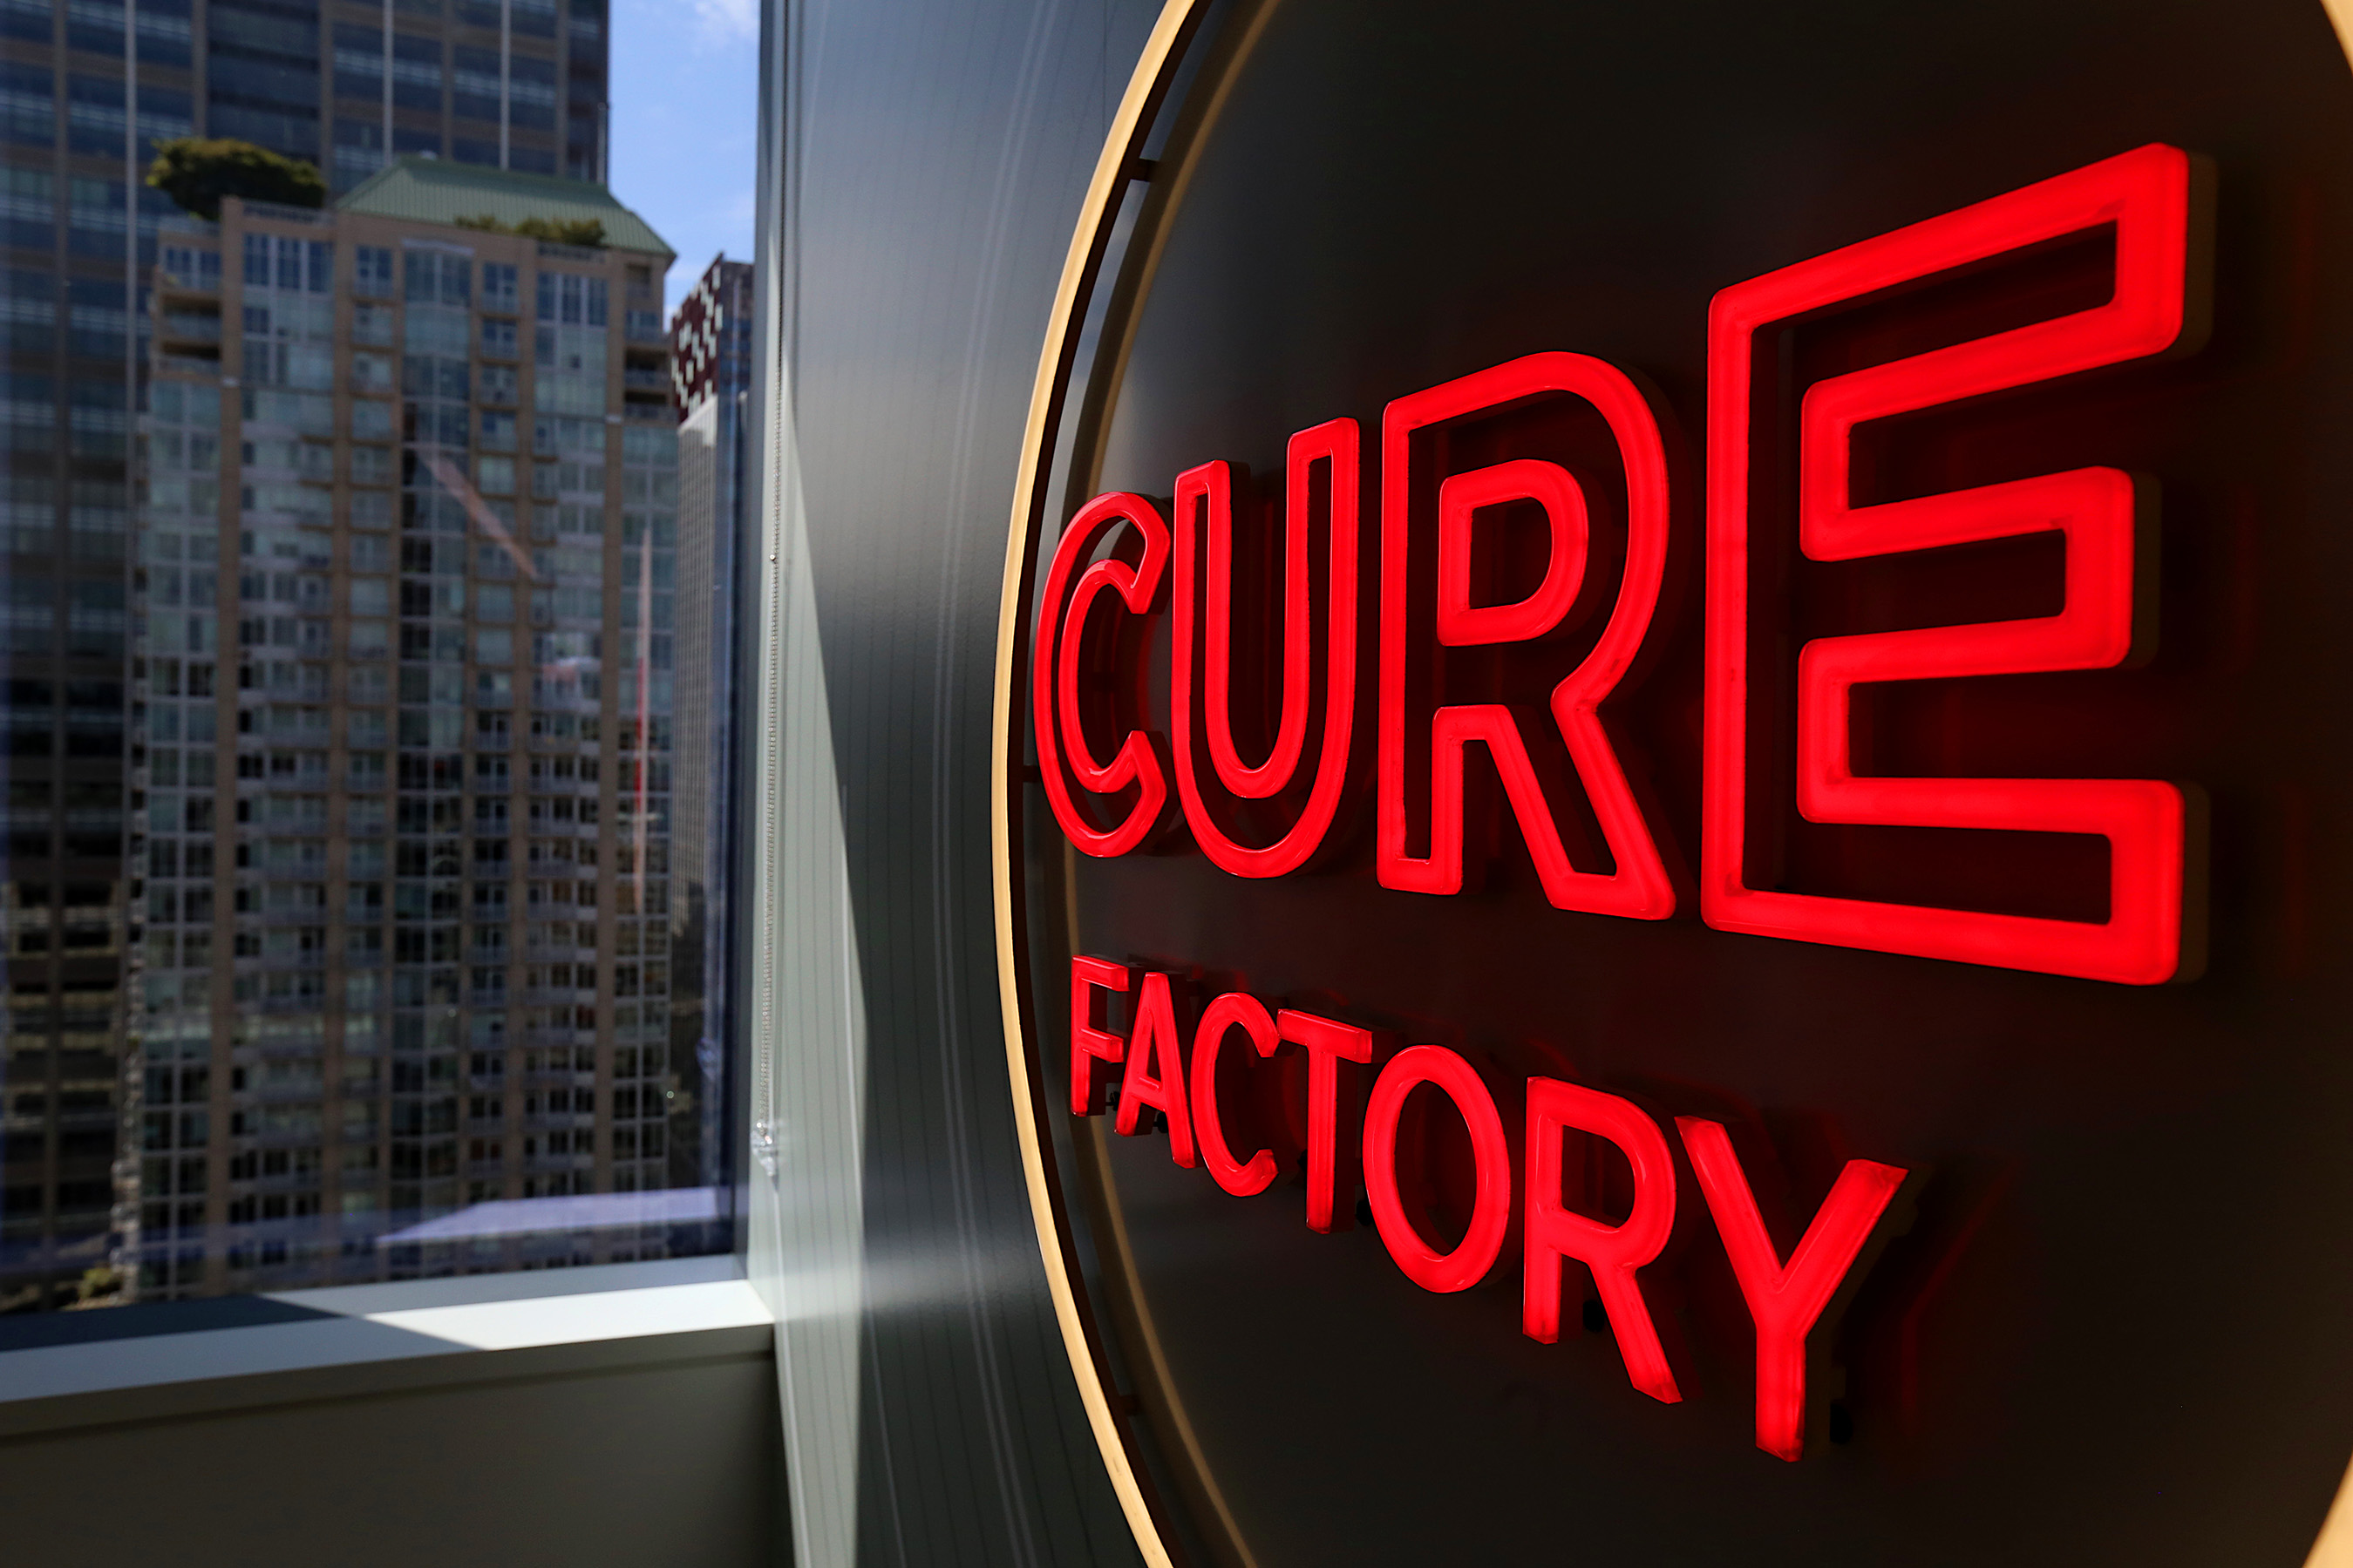 Building Cure will increase Seattle Children's capacity to produce investigational cancer immunotherapies and other cell therapies with the introduction of the Cure Factorytm facility.